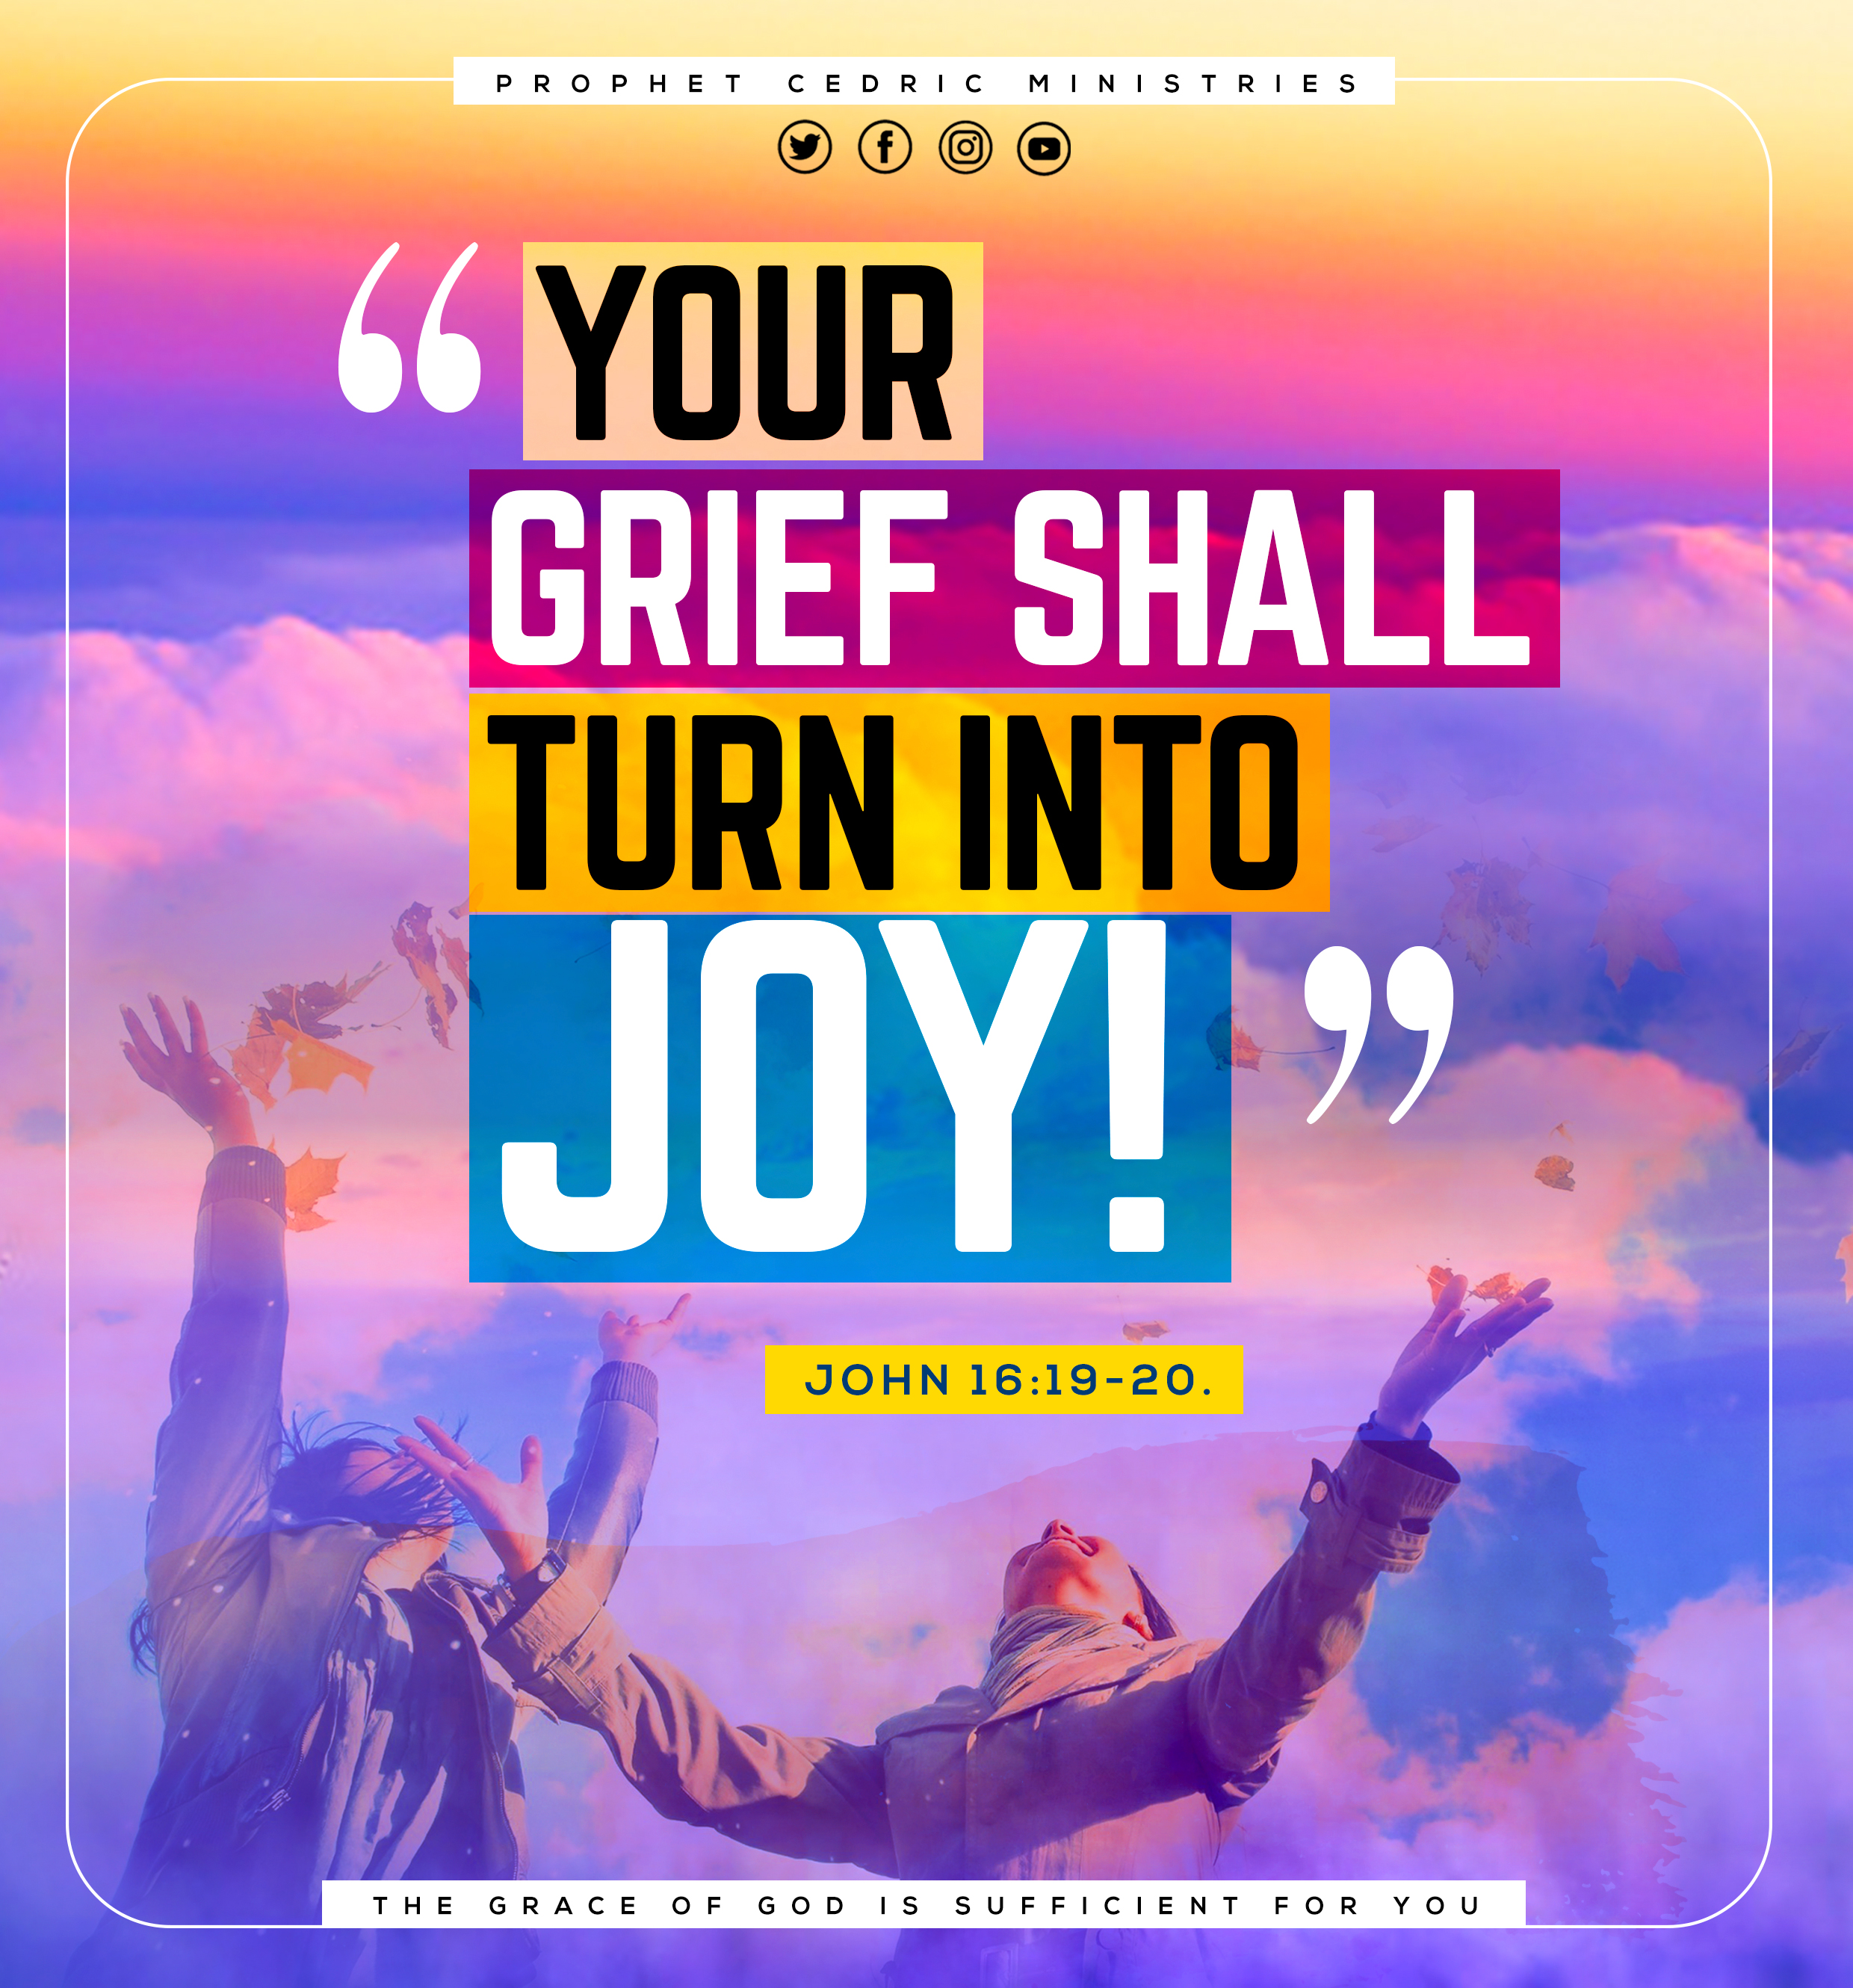 YOUR GRIEF SHALL TURN INTO JOY!